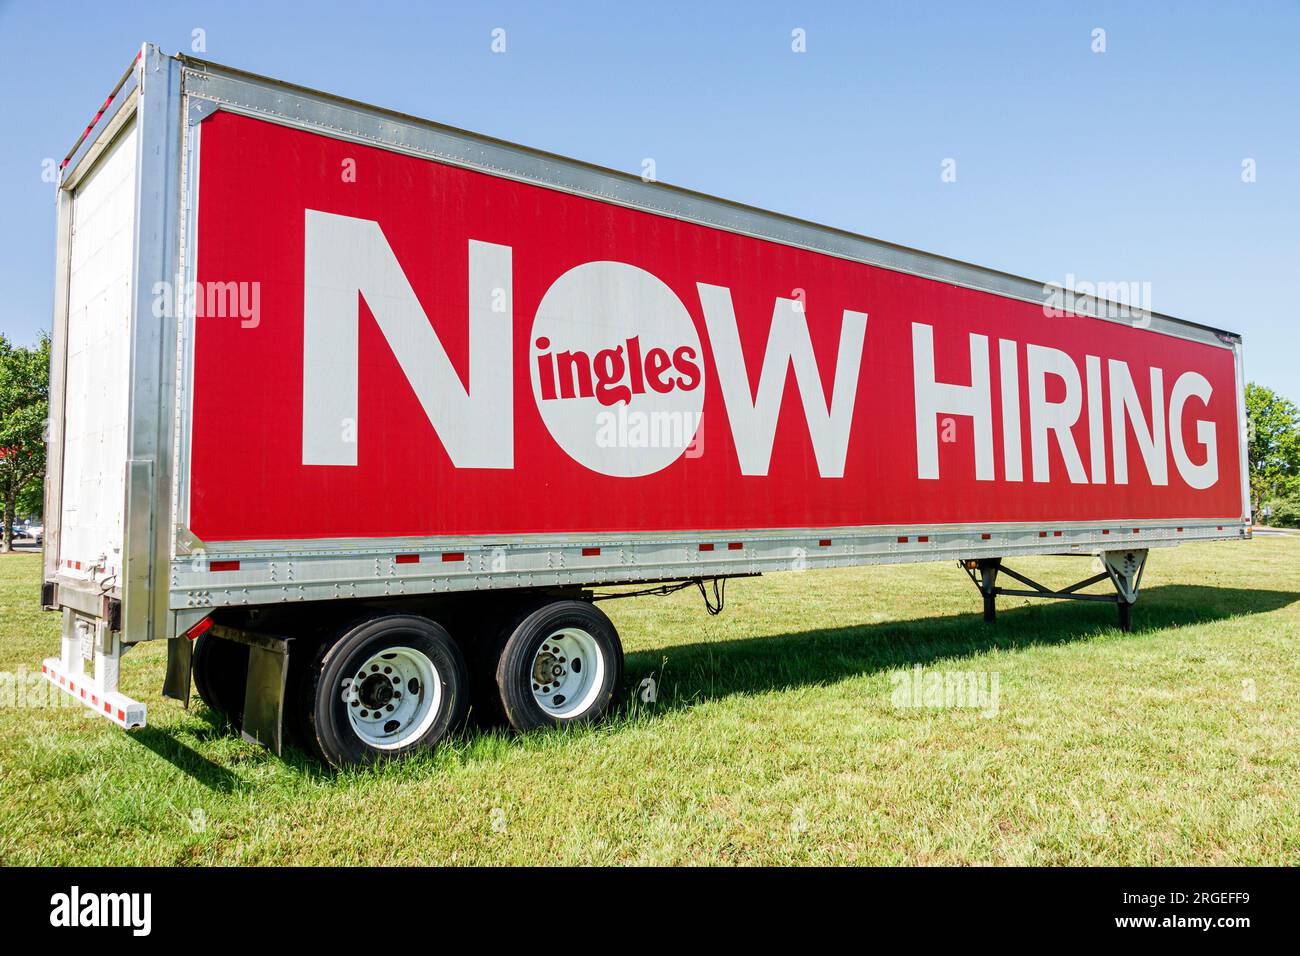 Flat Rock North Carolina,parked tractor trailer billboard,help wanted now hiring,Ingles supermarket grocery store chain,sign information,promoting pro Stock Photo